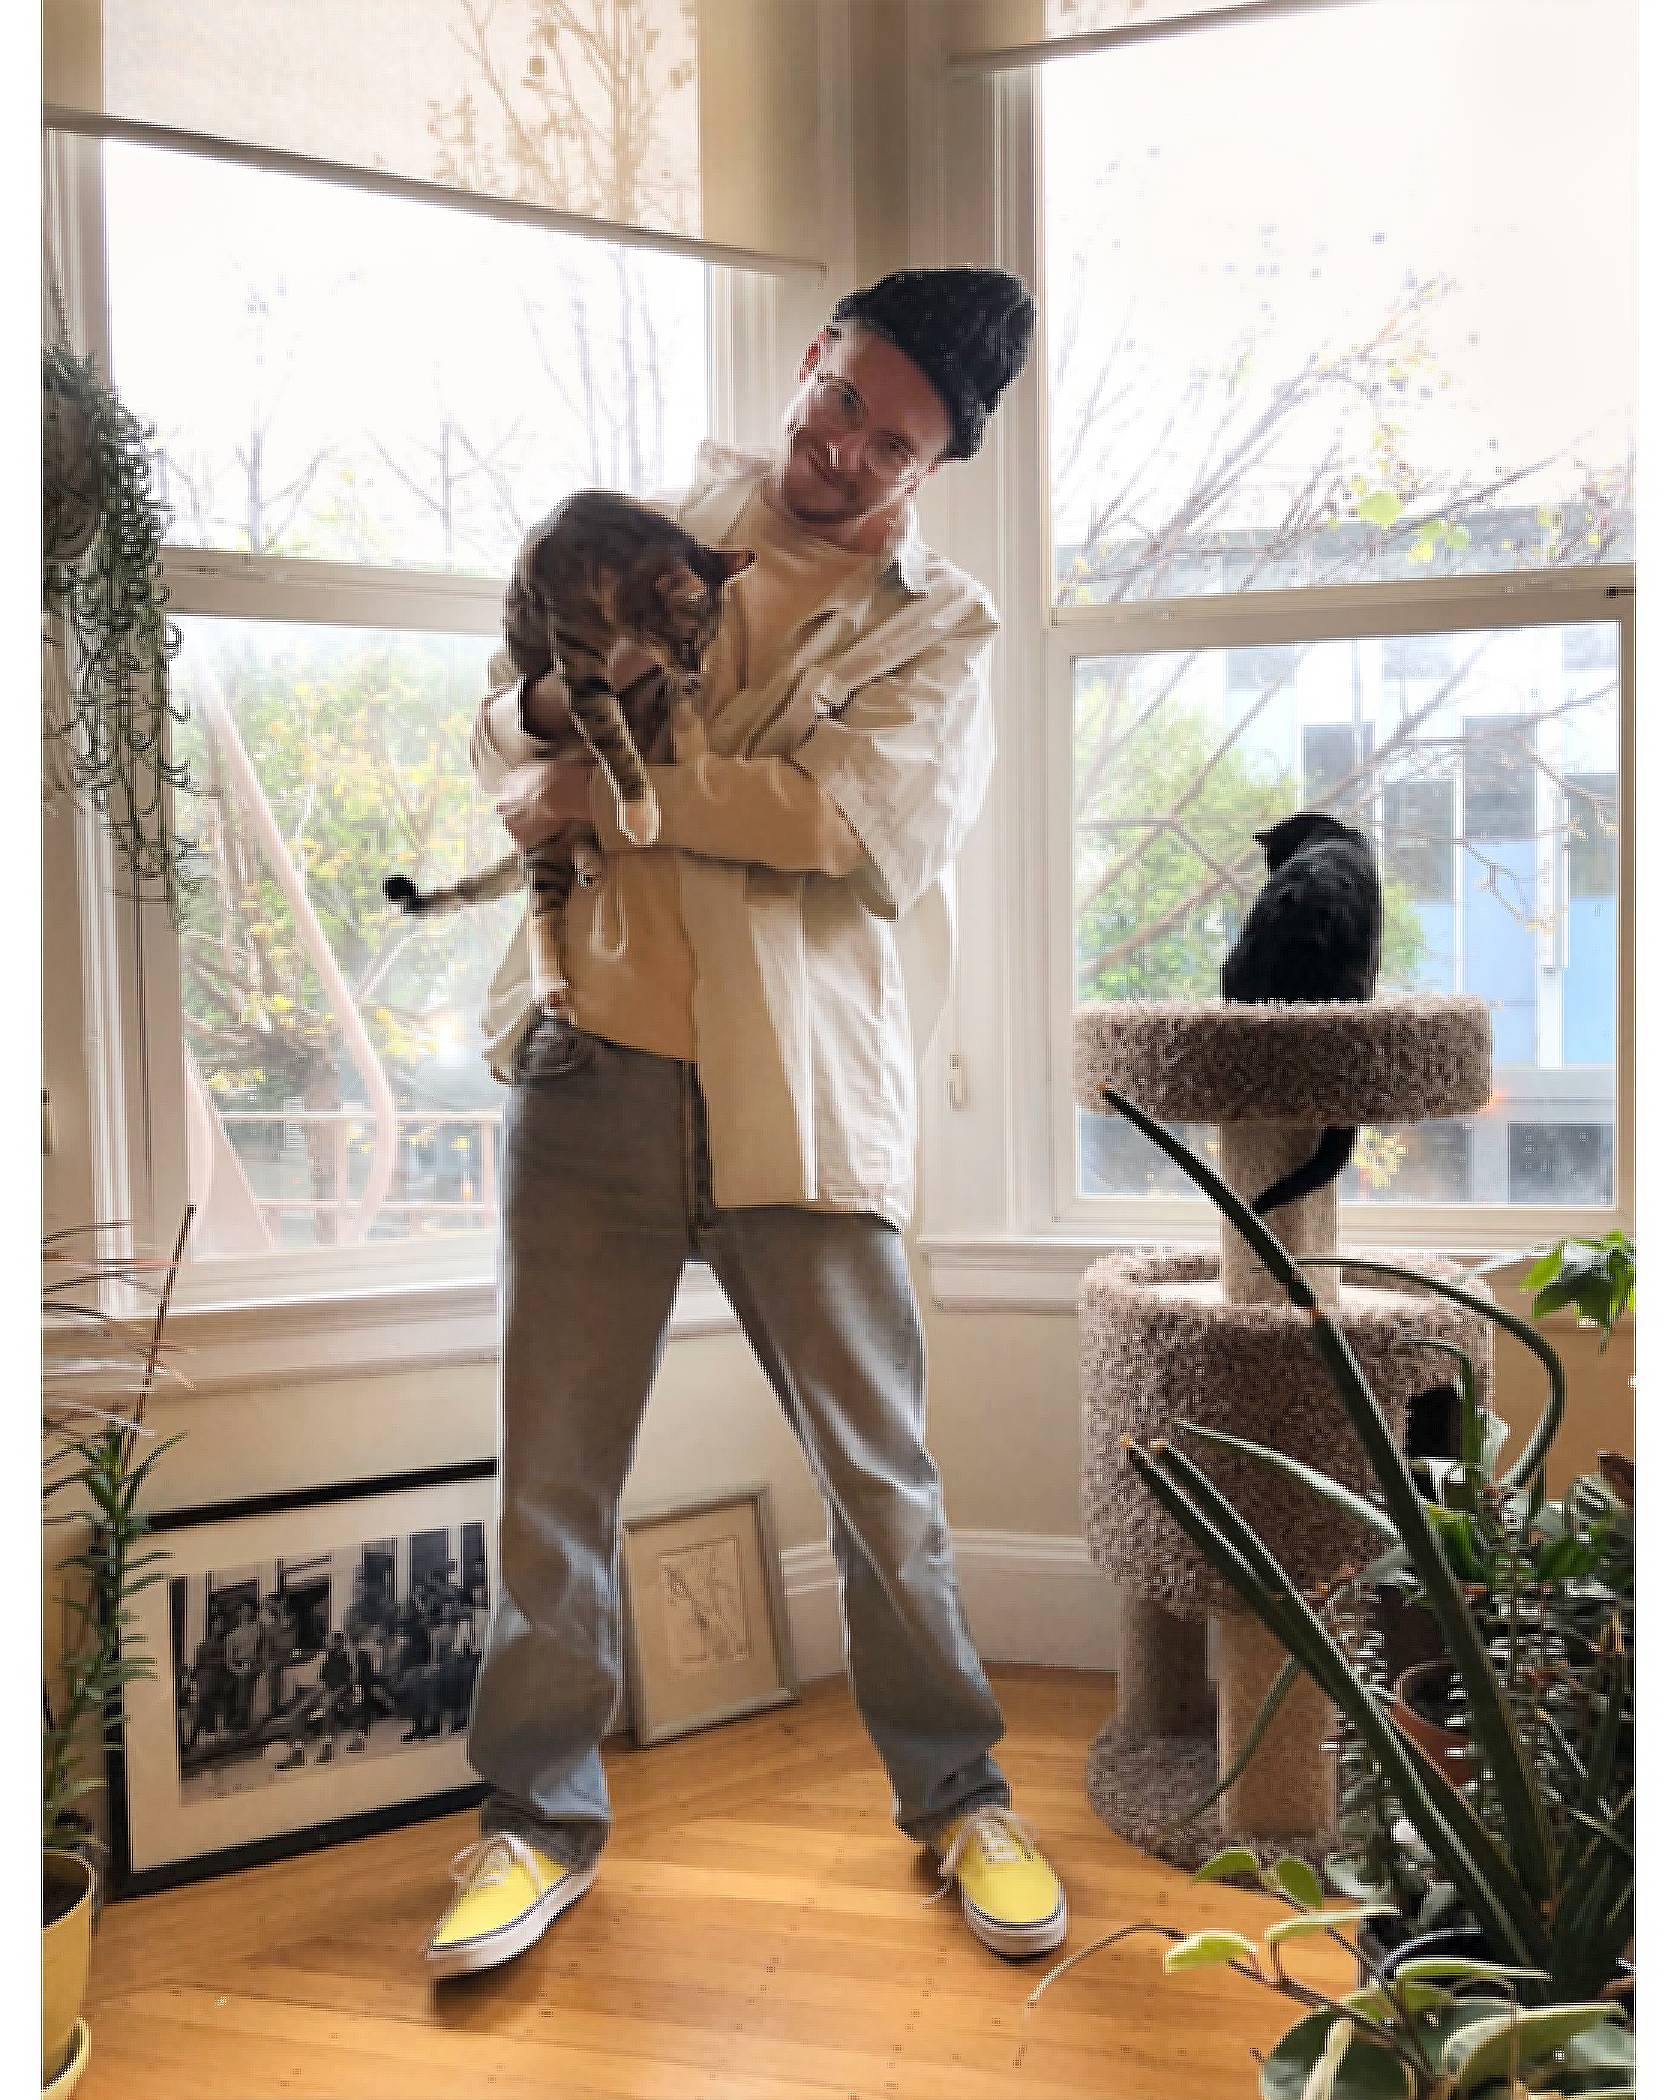 Photo of Ezra Price in his apartment. He's holding his cat and smiling.